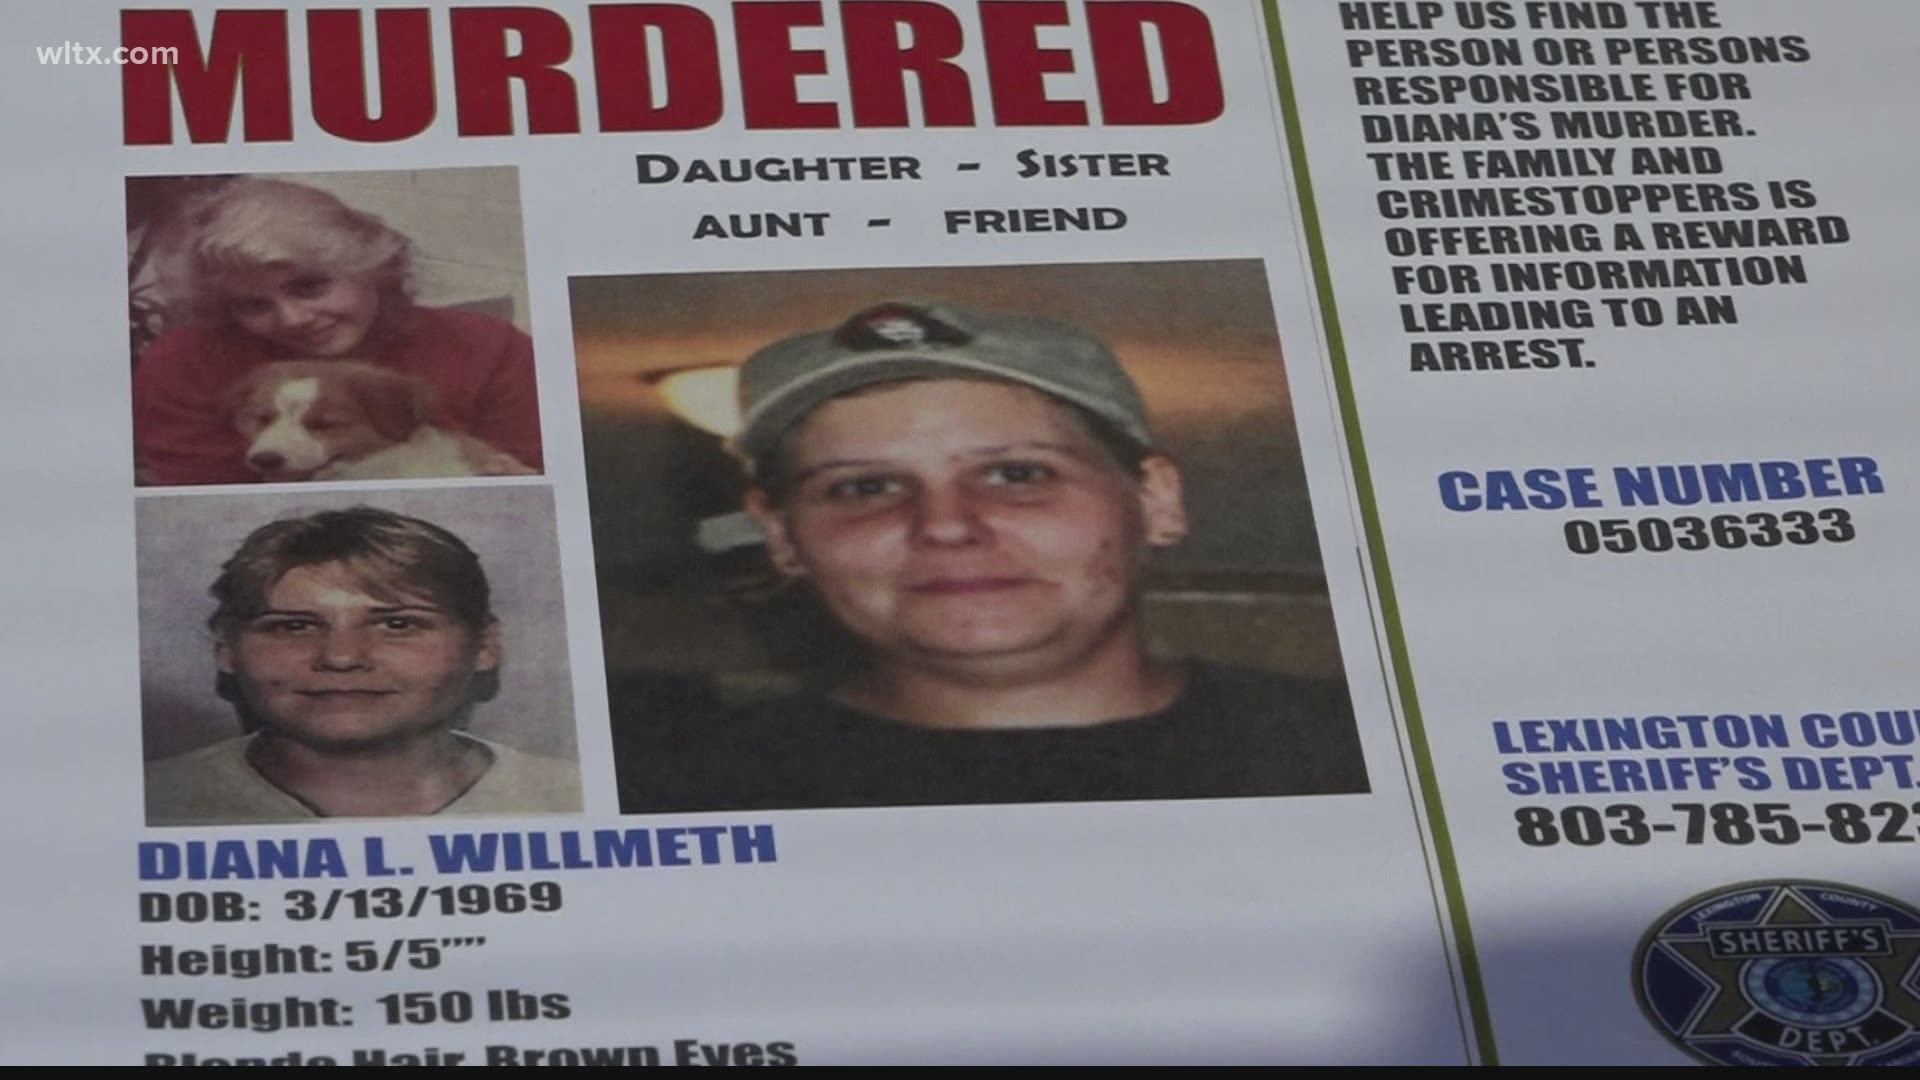 36-year-old Diana Willmeth was reported missing after she didn't show up to her family's 2005 Mother's Day celebration.